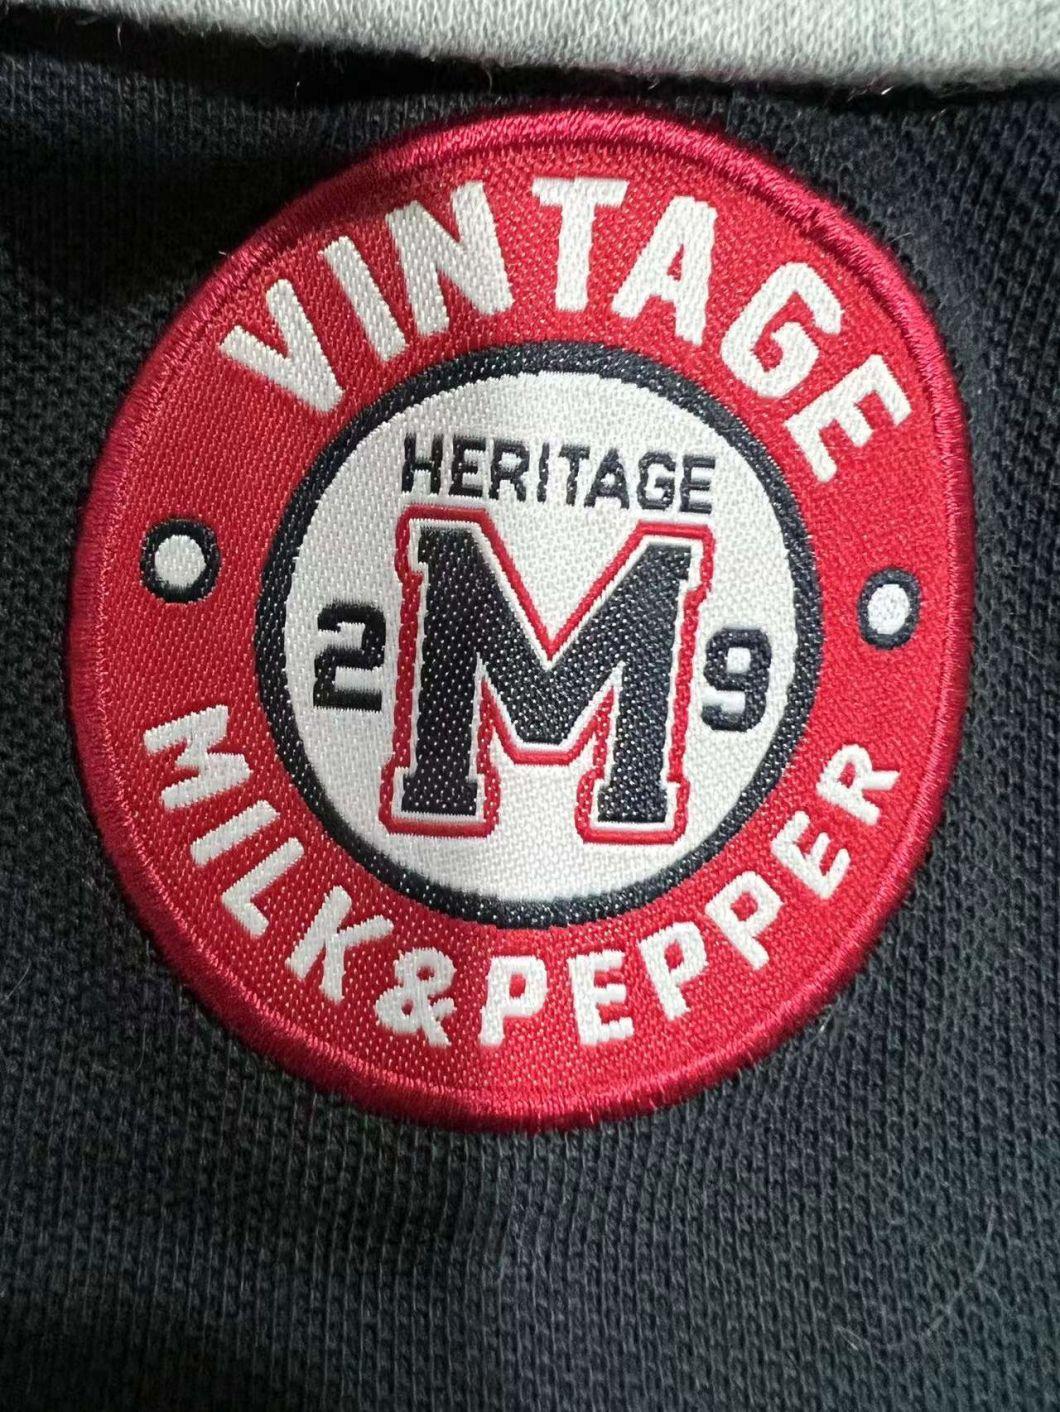 "Vin Tage Heritage 2m9 Milk Pepper" Puppy Vest Tank Shirt Pet Products Dog Products